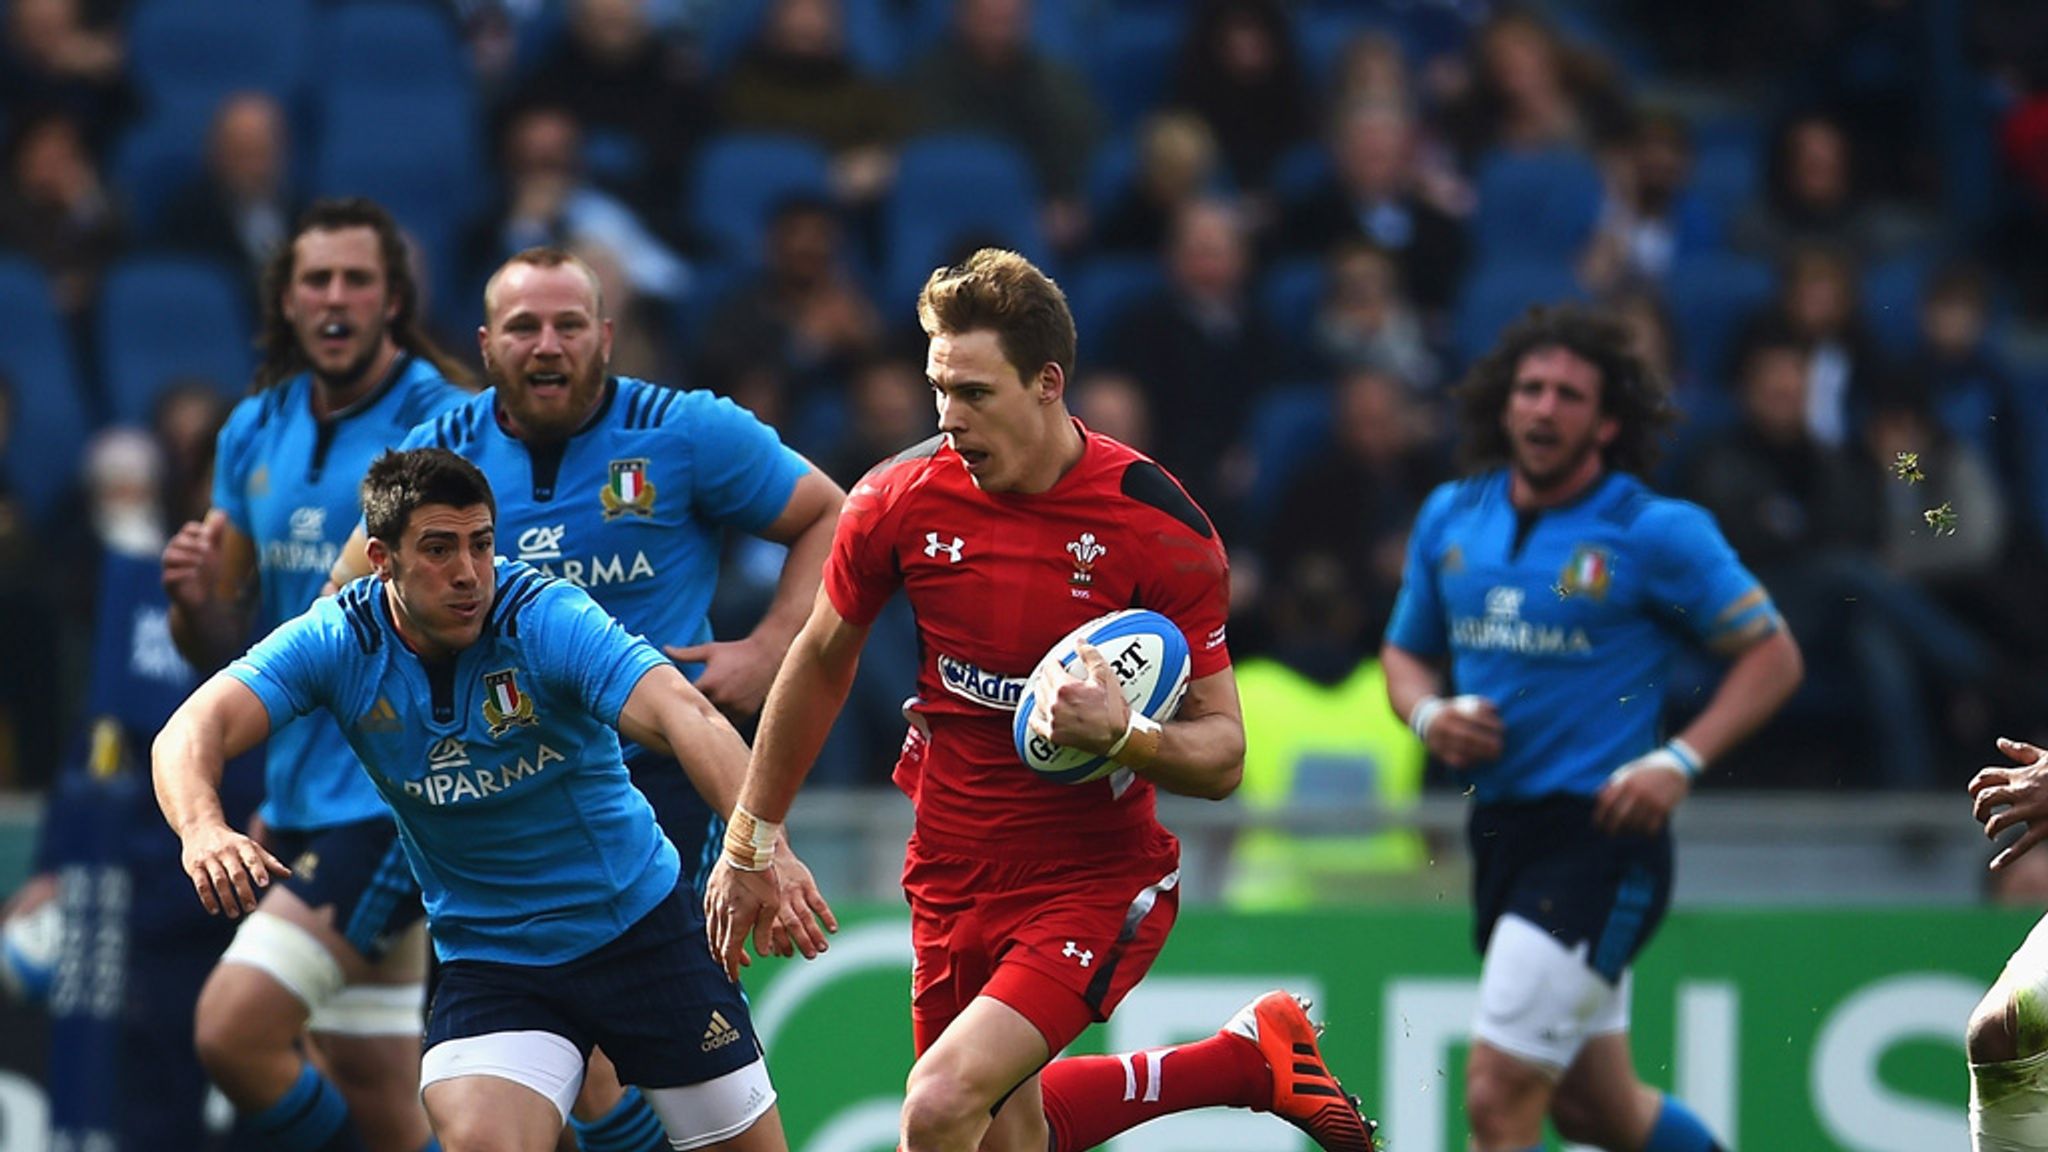 Six Nations Wales produced a superb second half display to beat Italy 61-20 at Stadio Olimpico Rugby Union News Sky Sports